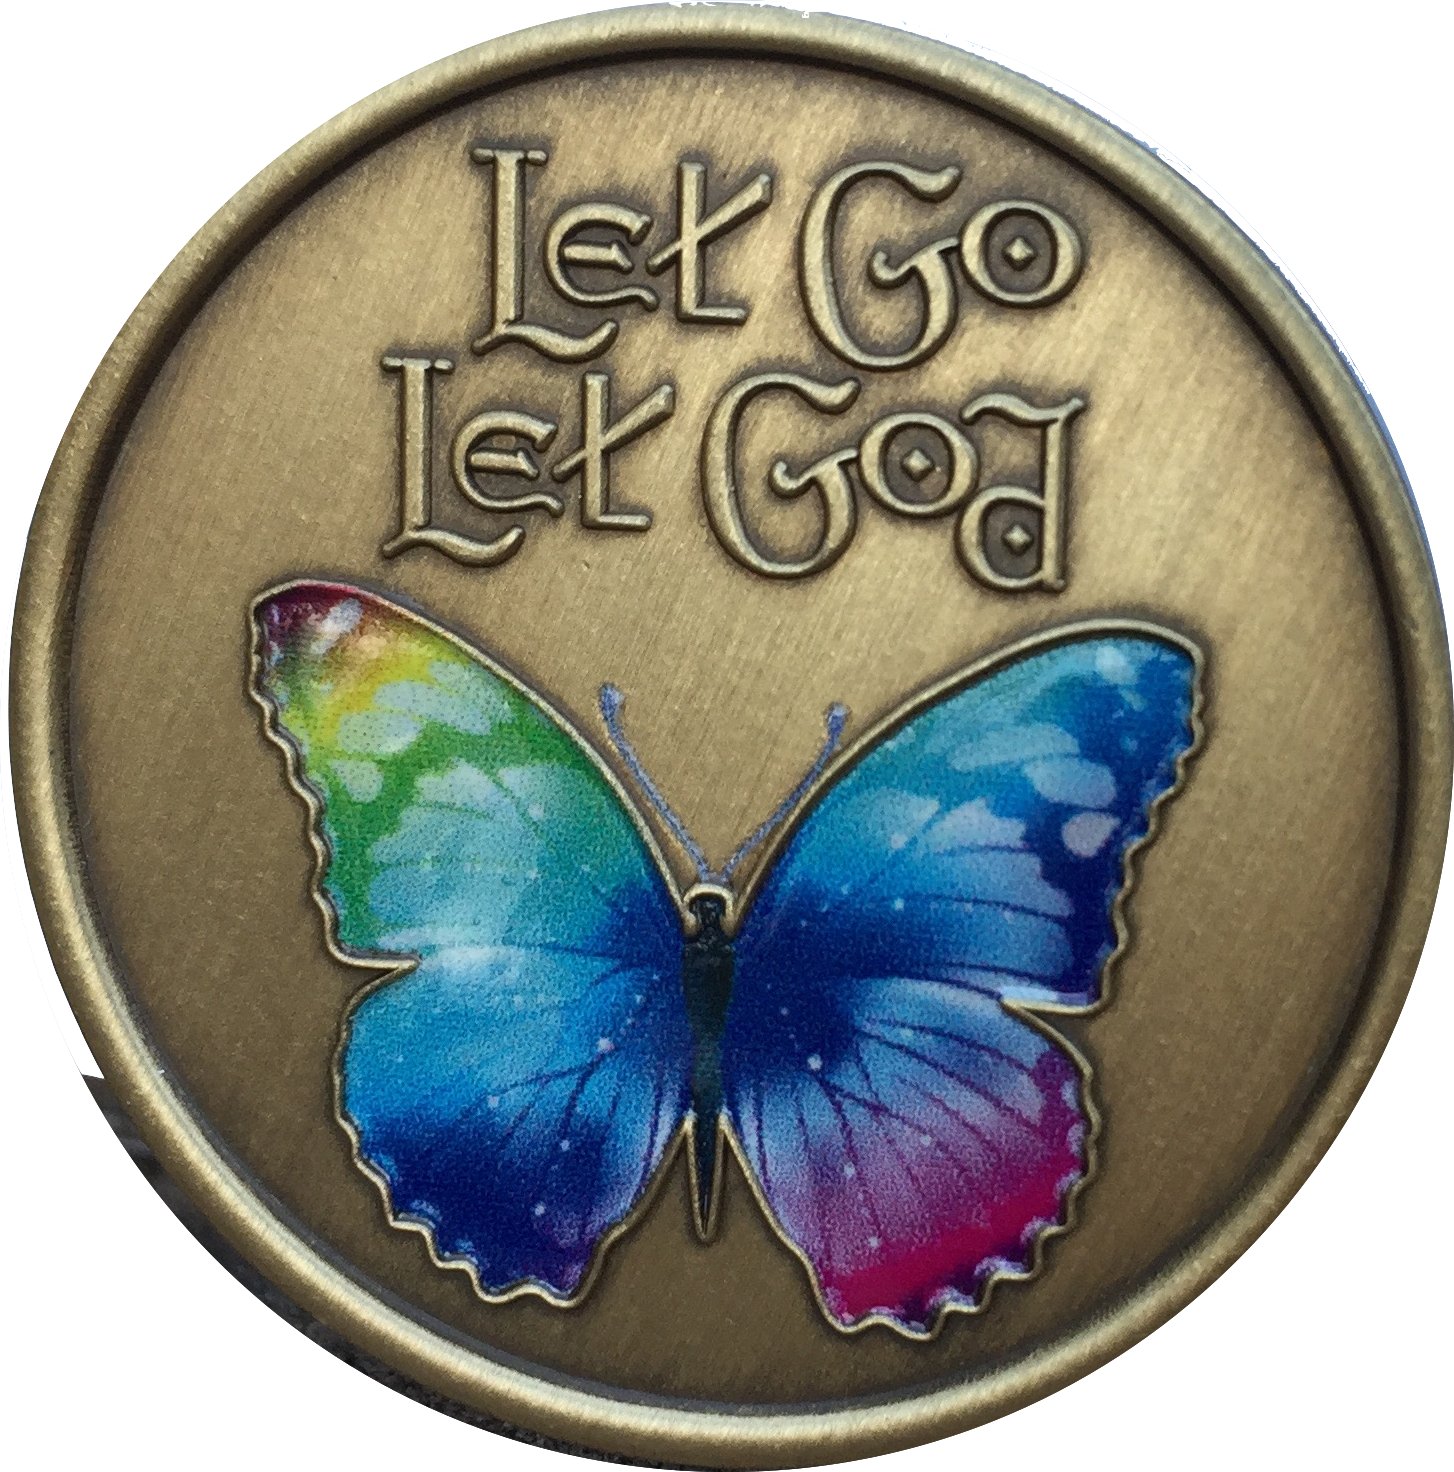 Let Go Let God Color Butterfly Bronze Serenity Prayer Medallion Chip - RecoveryChip